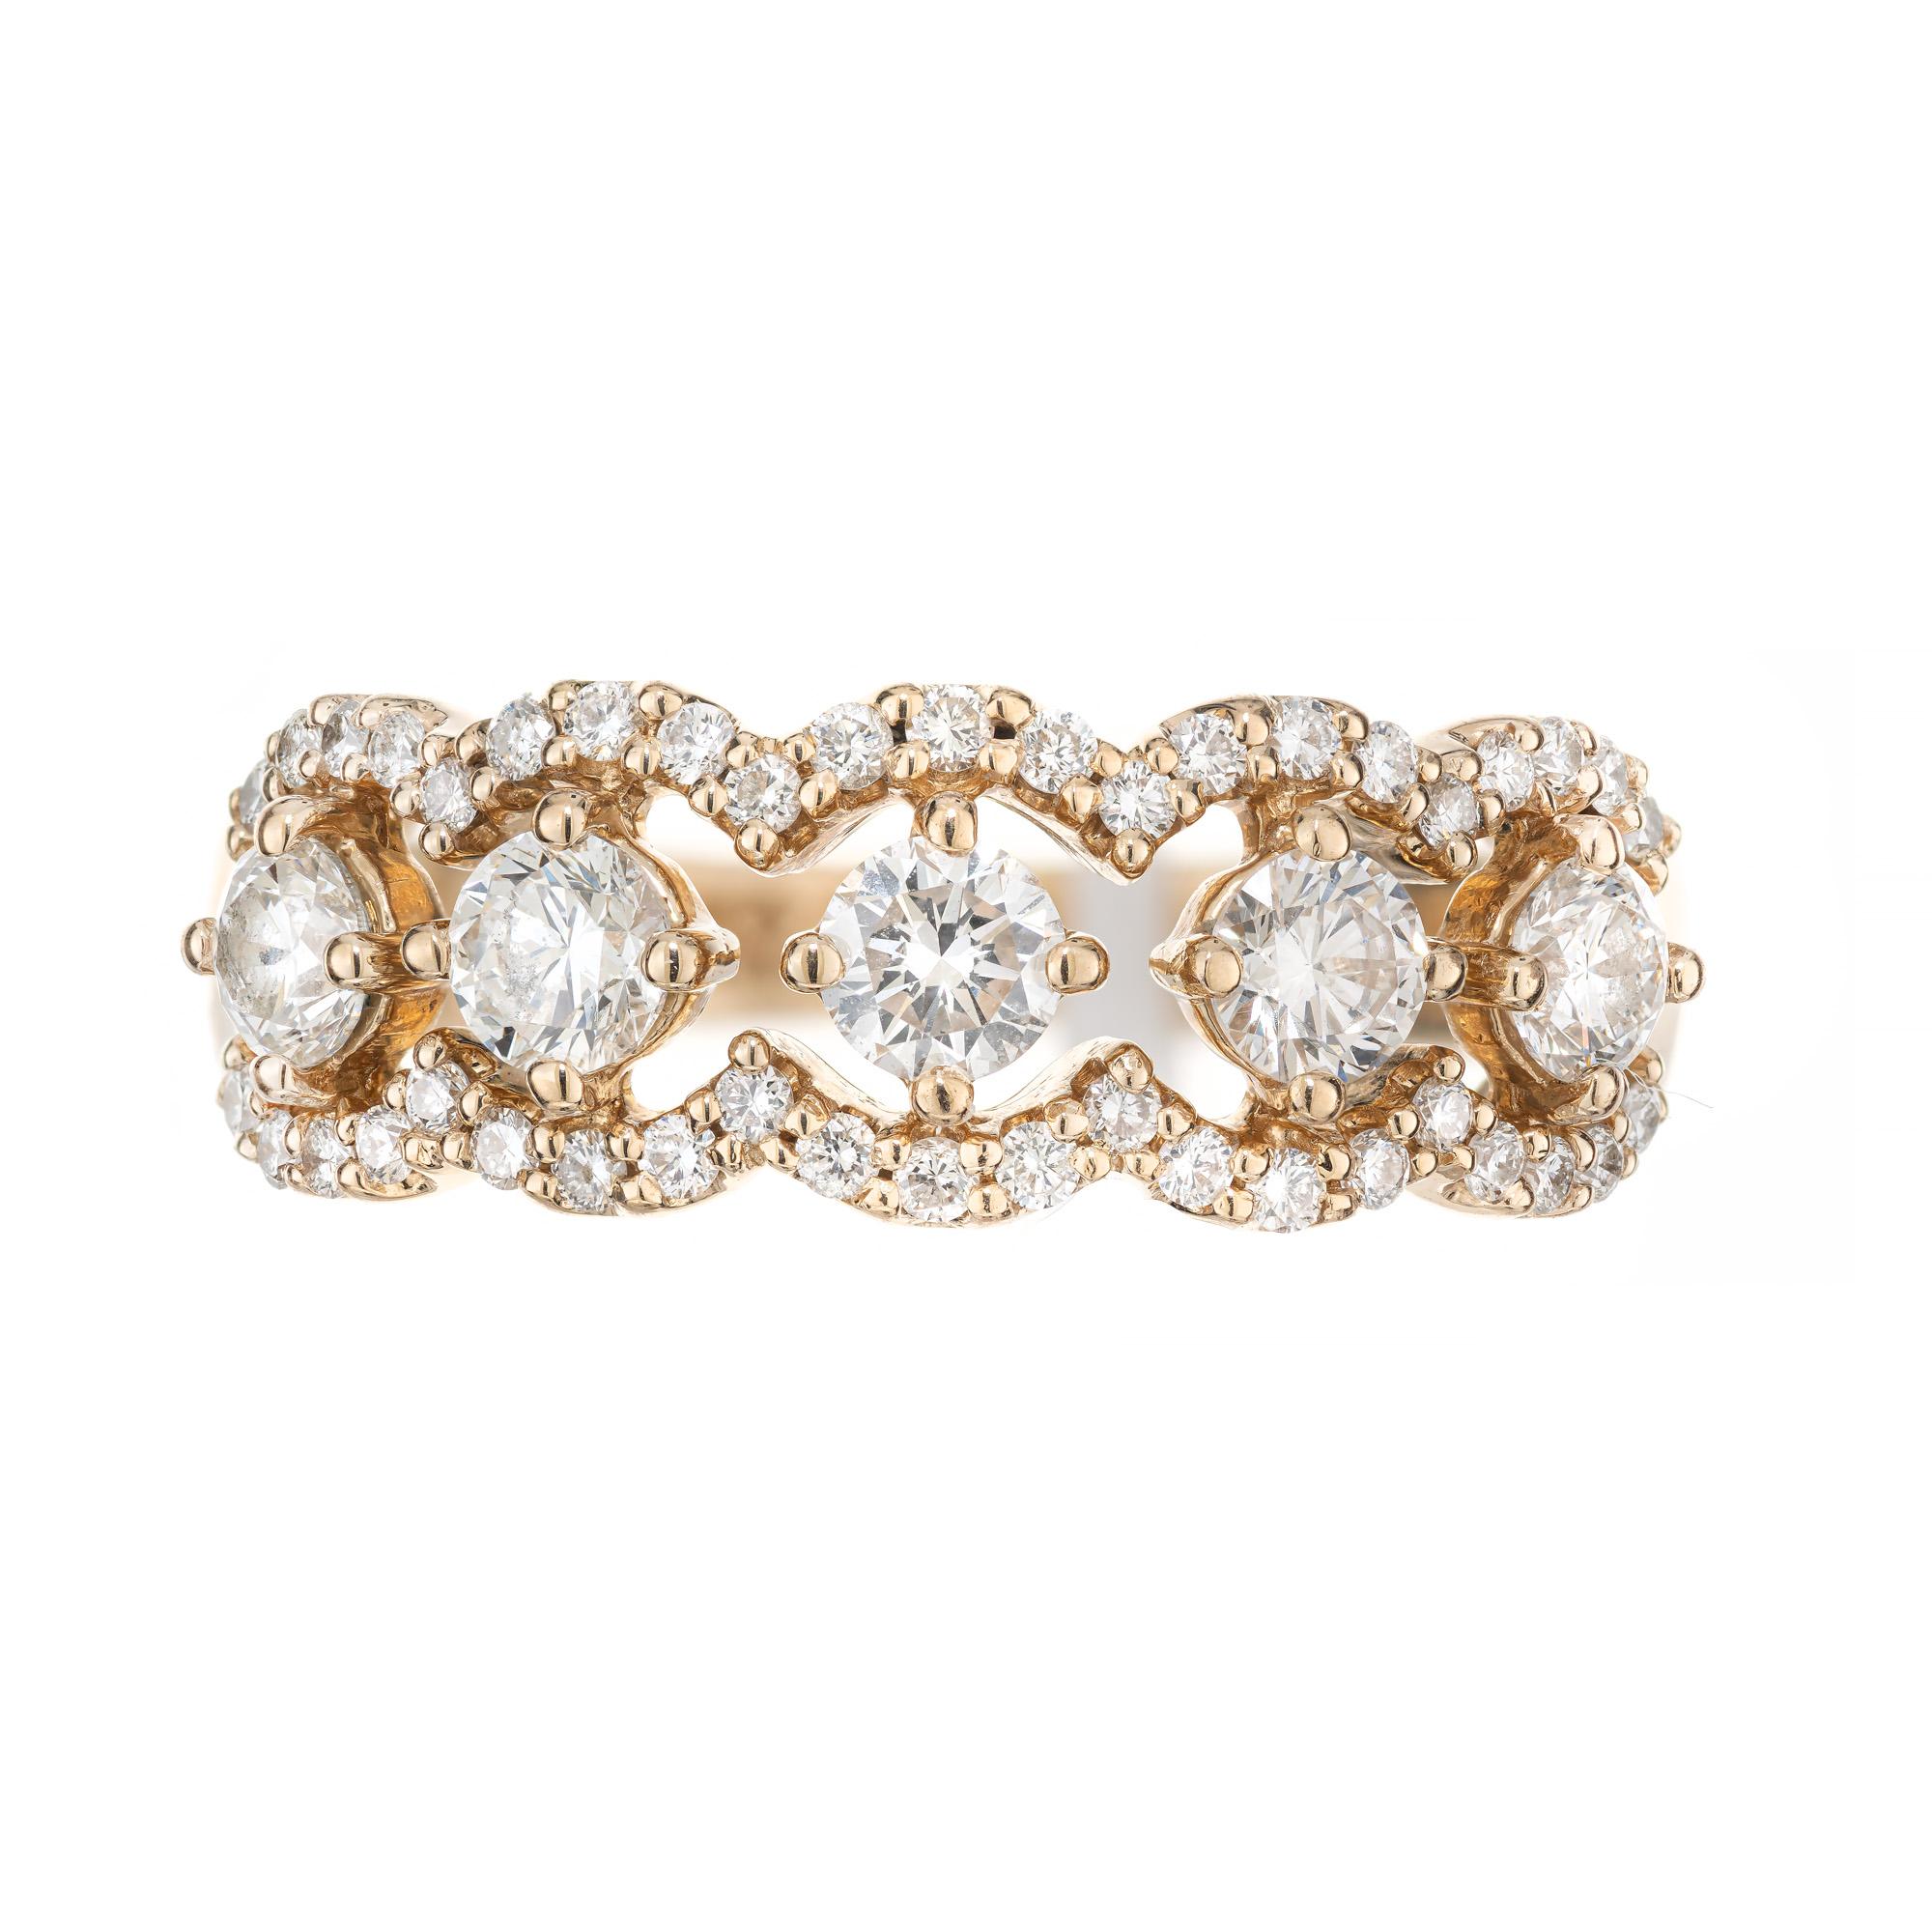 Beautiful and unique diamond wedding band ring. Five round brilliant cut diamond totaling .70cts. in a suspended style setting each having a halo of scrolling round cut diamonds totaling .32cts. 14k yellow gold setting. This ring can worn as a